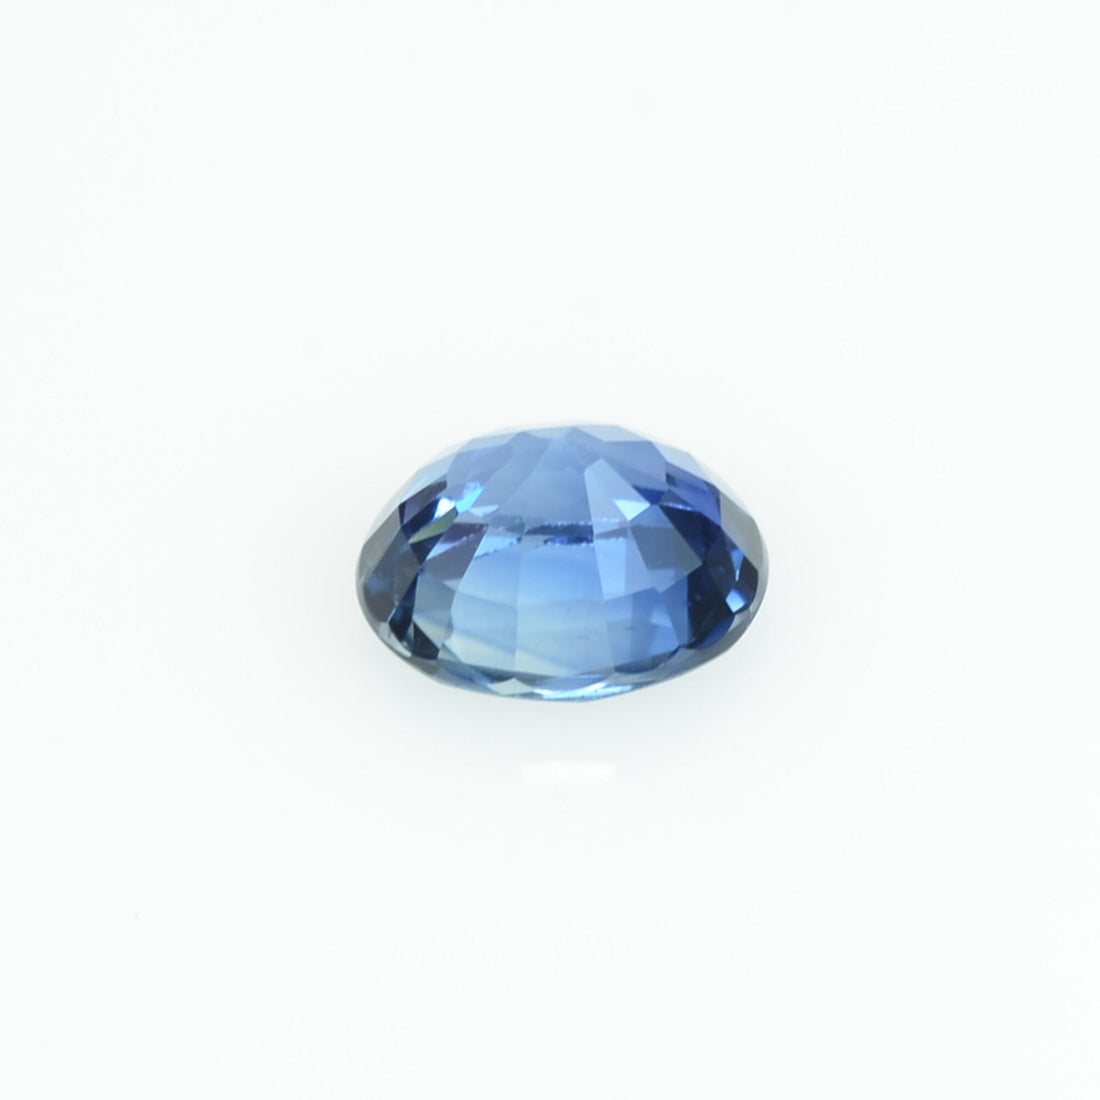 0.71 cts natural blue sapphire loose gemstone oval cut